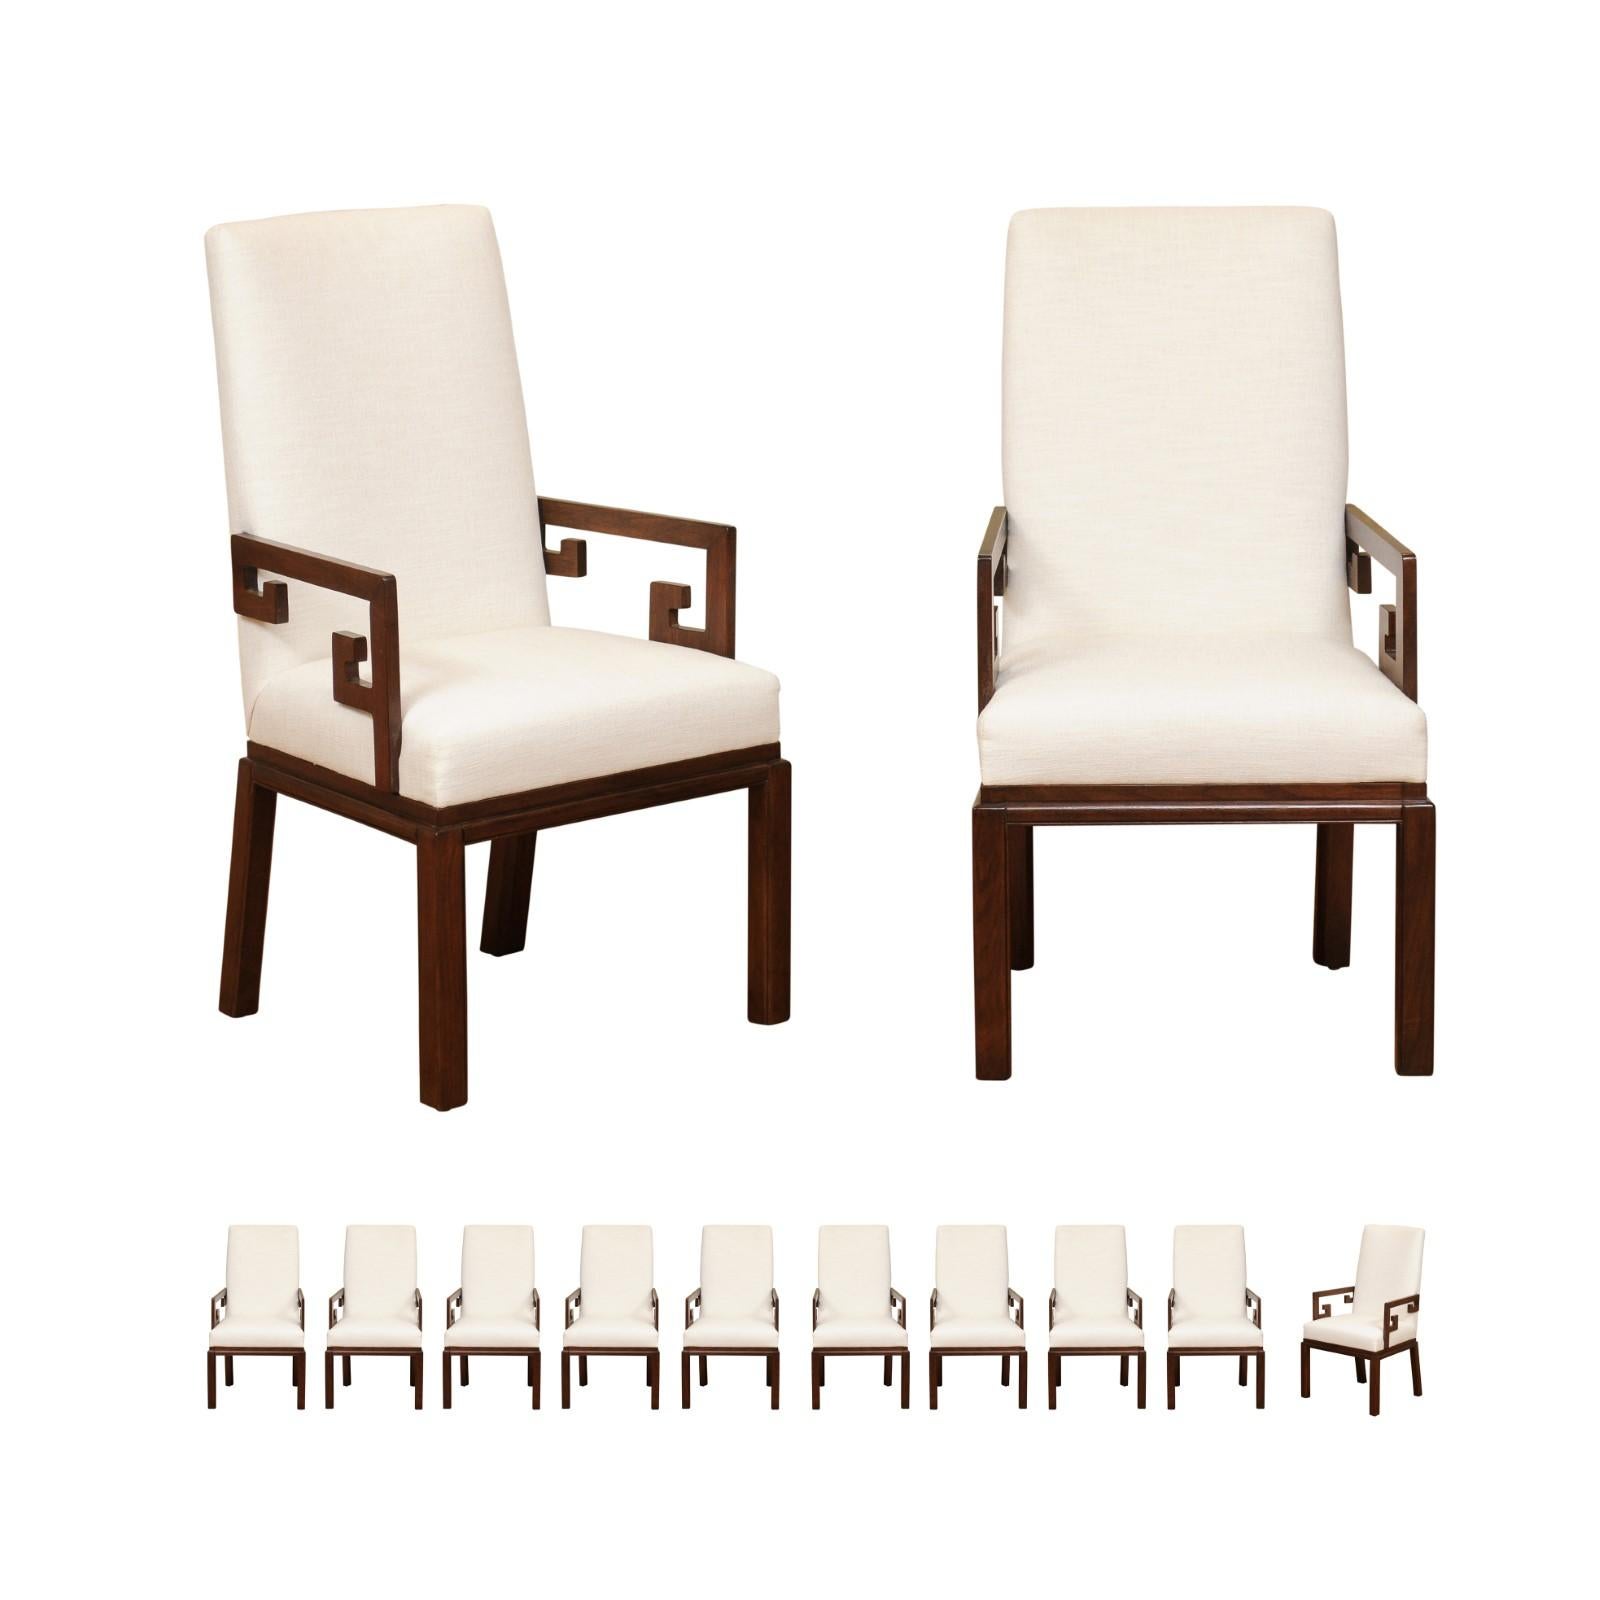 All Arms, Sublime Set of 12 Greek Key Chairs by Michael Taylor, circa 1970